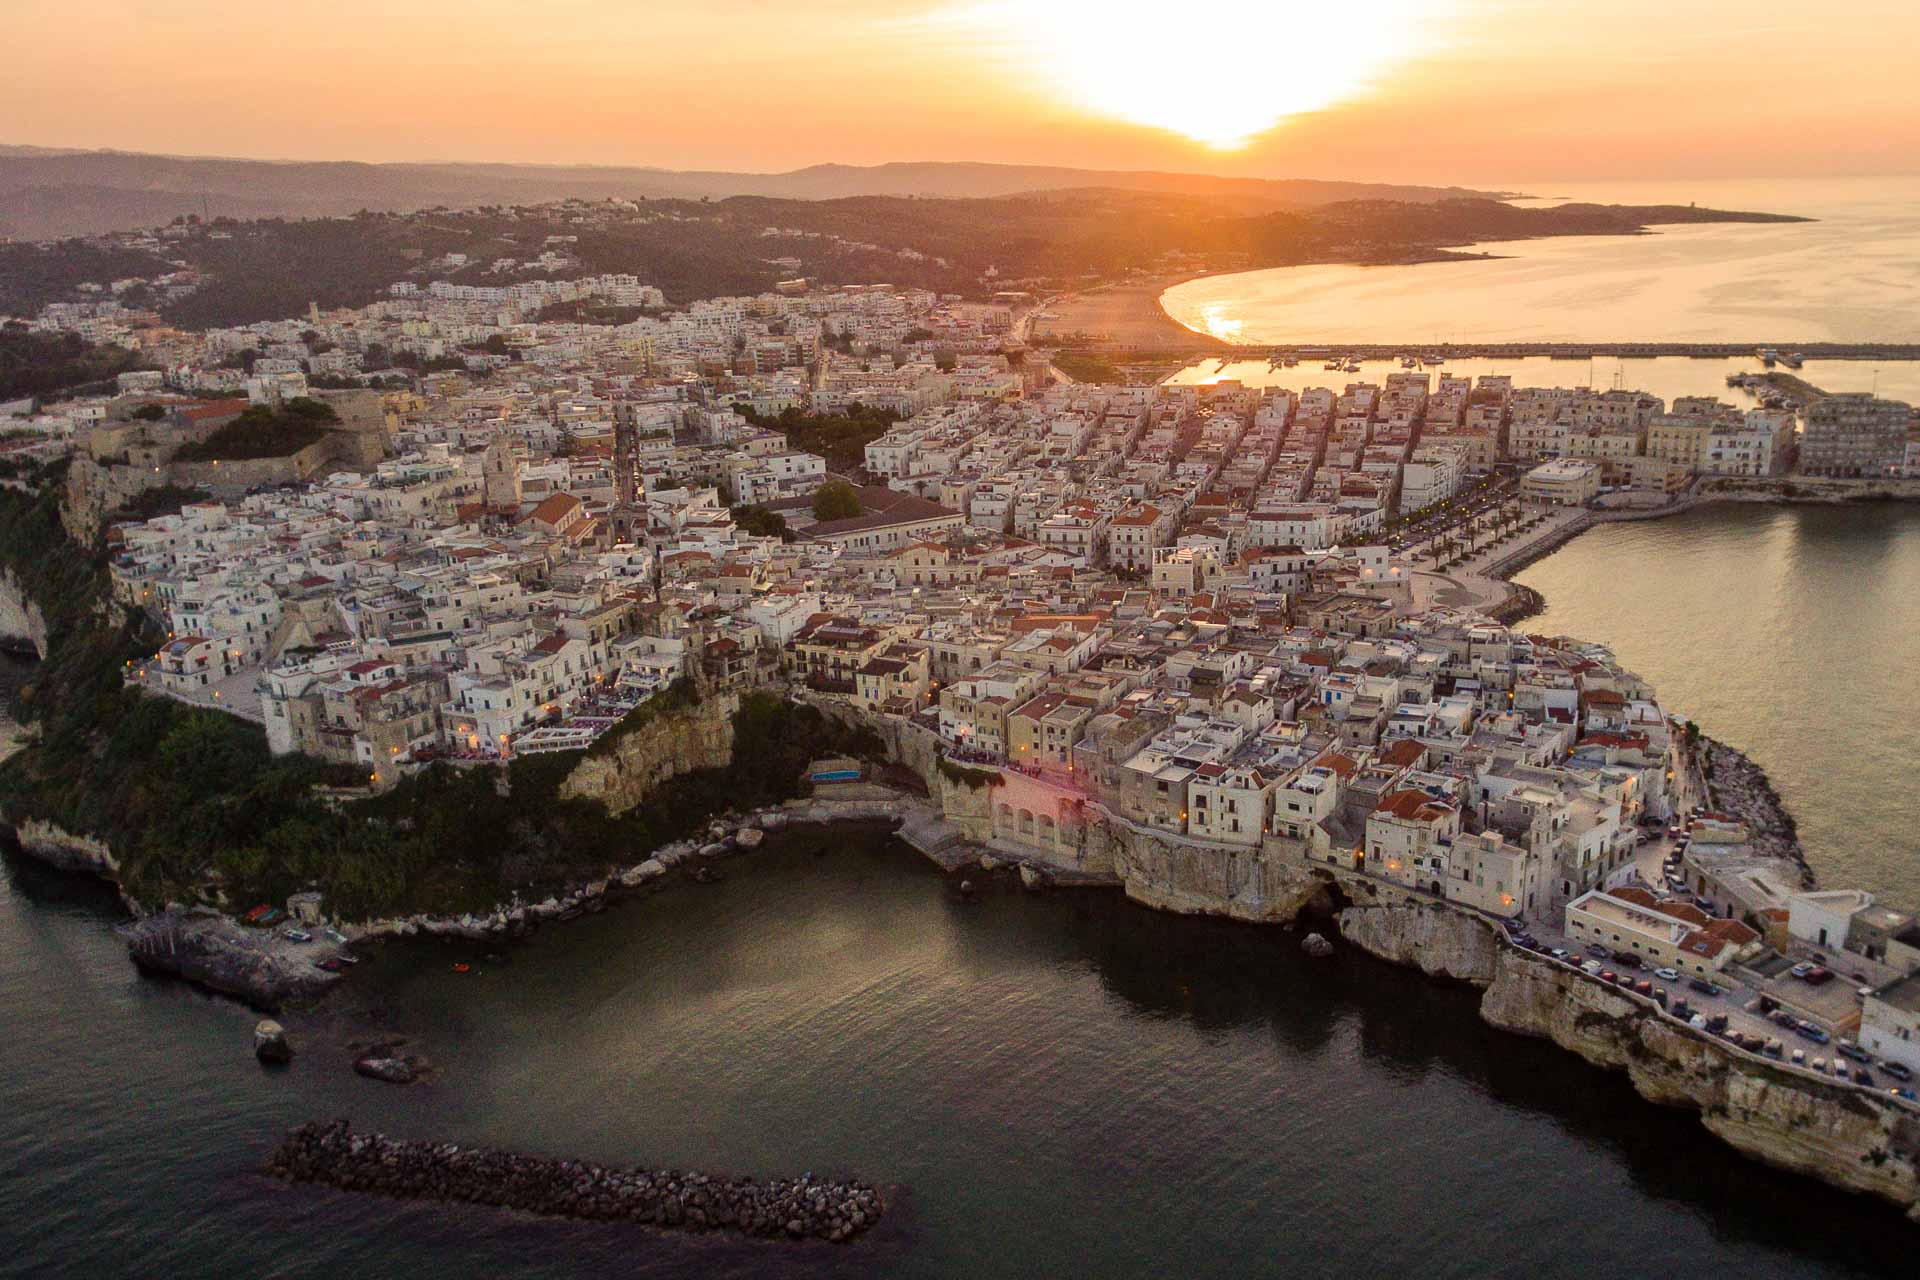 Aerial view of Italian city surrounded by the sea at sunset